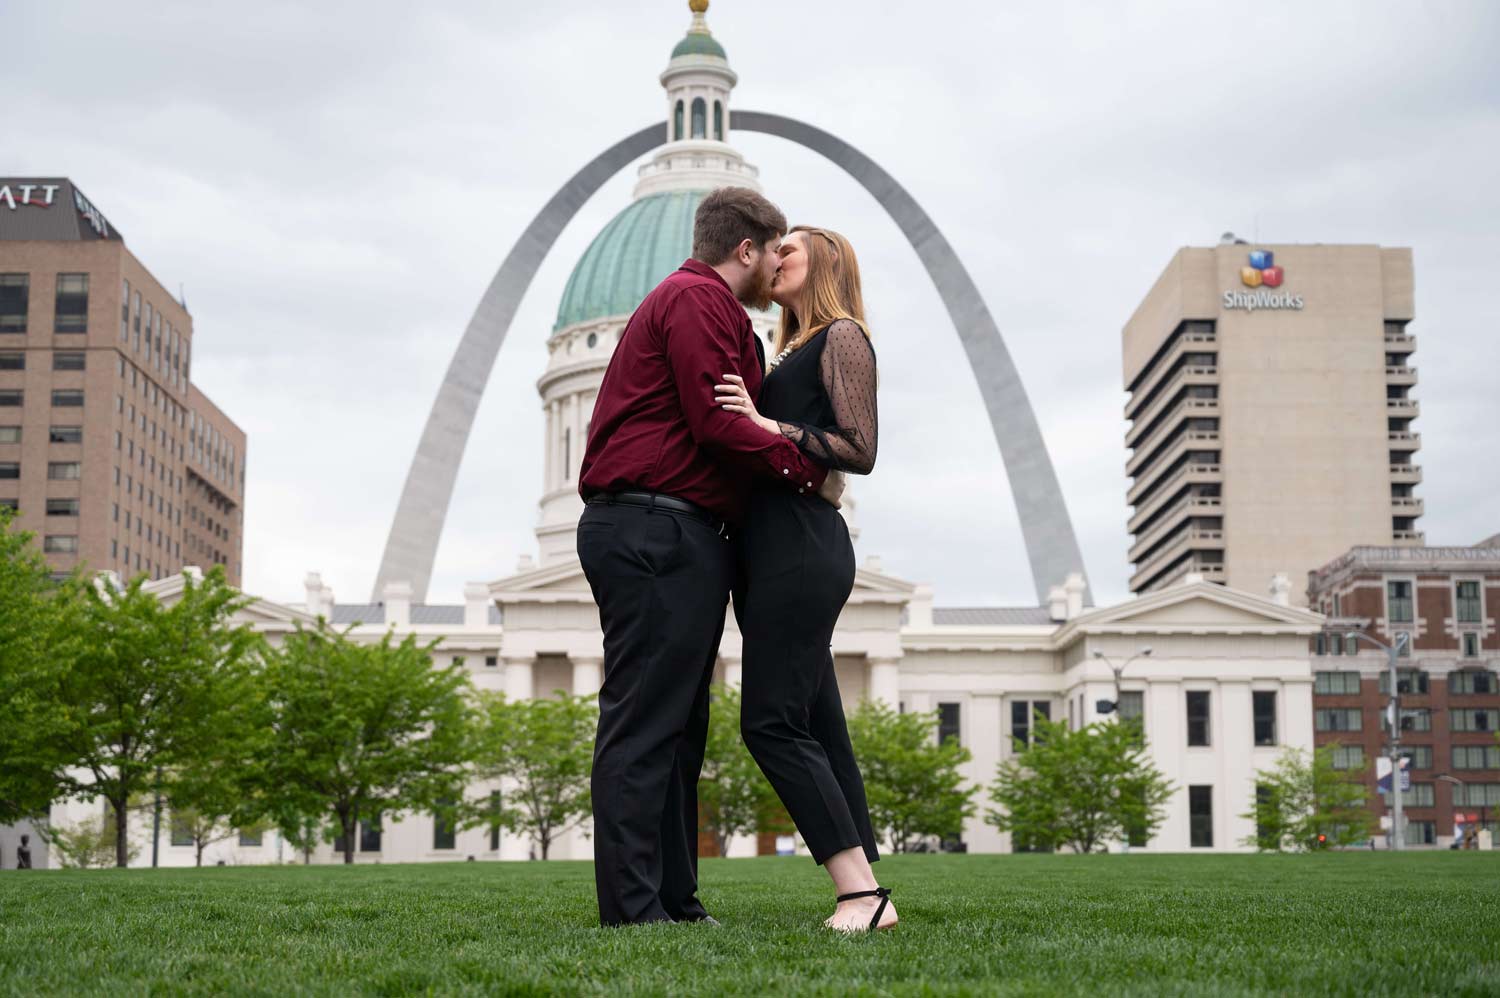 engagement photo at Kiener Plaza in front of St. Louis Arch